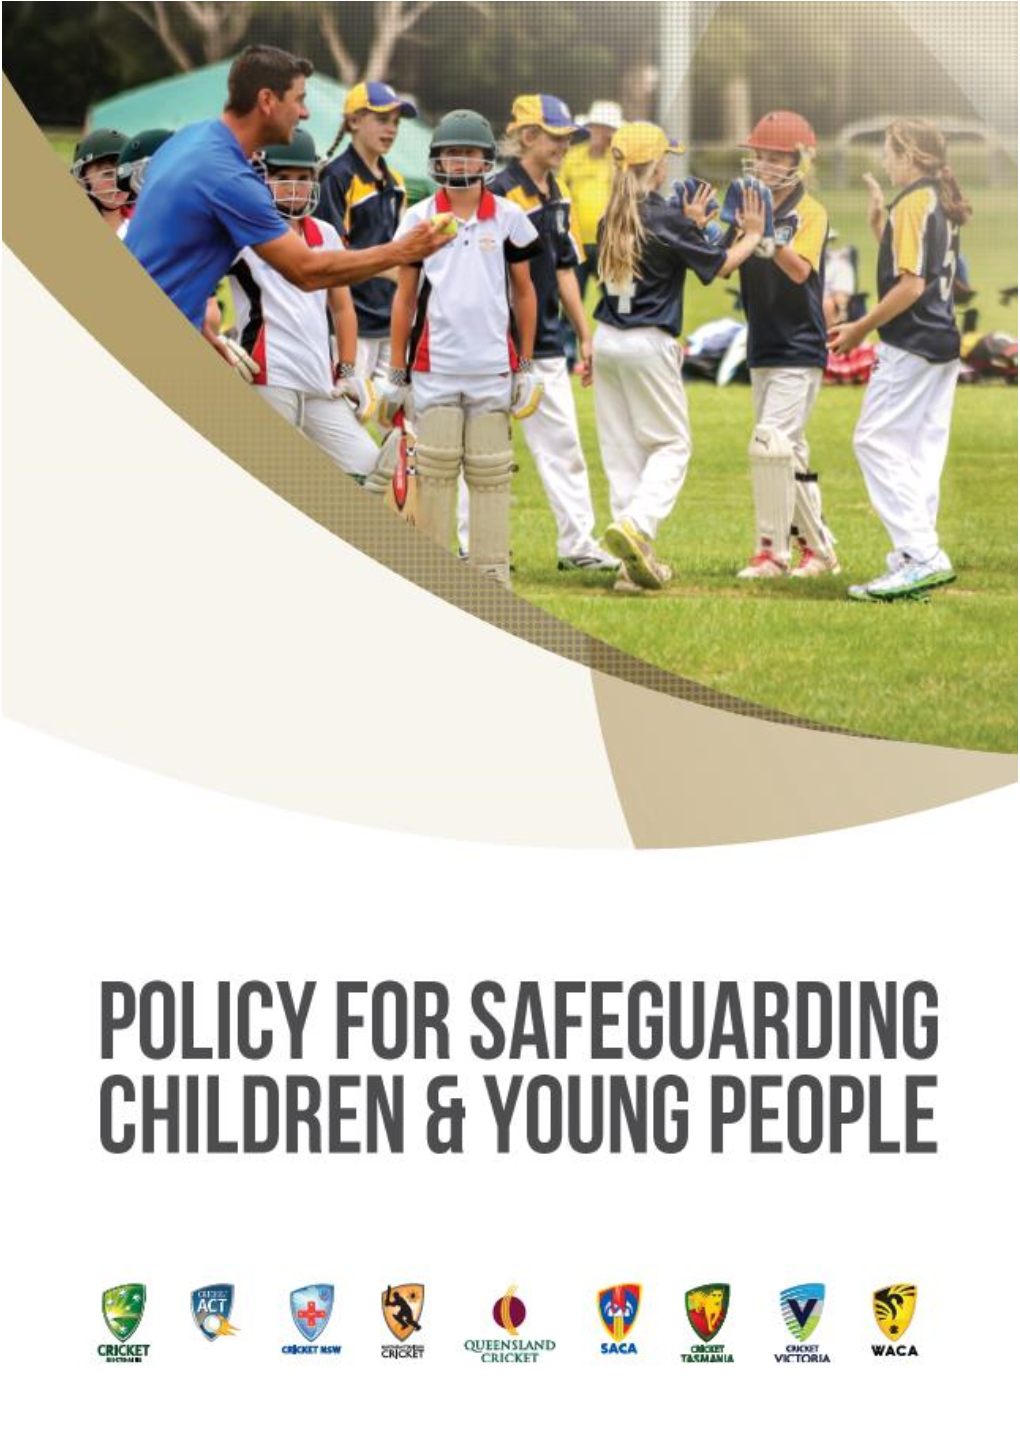 'Australian Cricket's Policy for Safeguarding